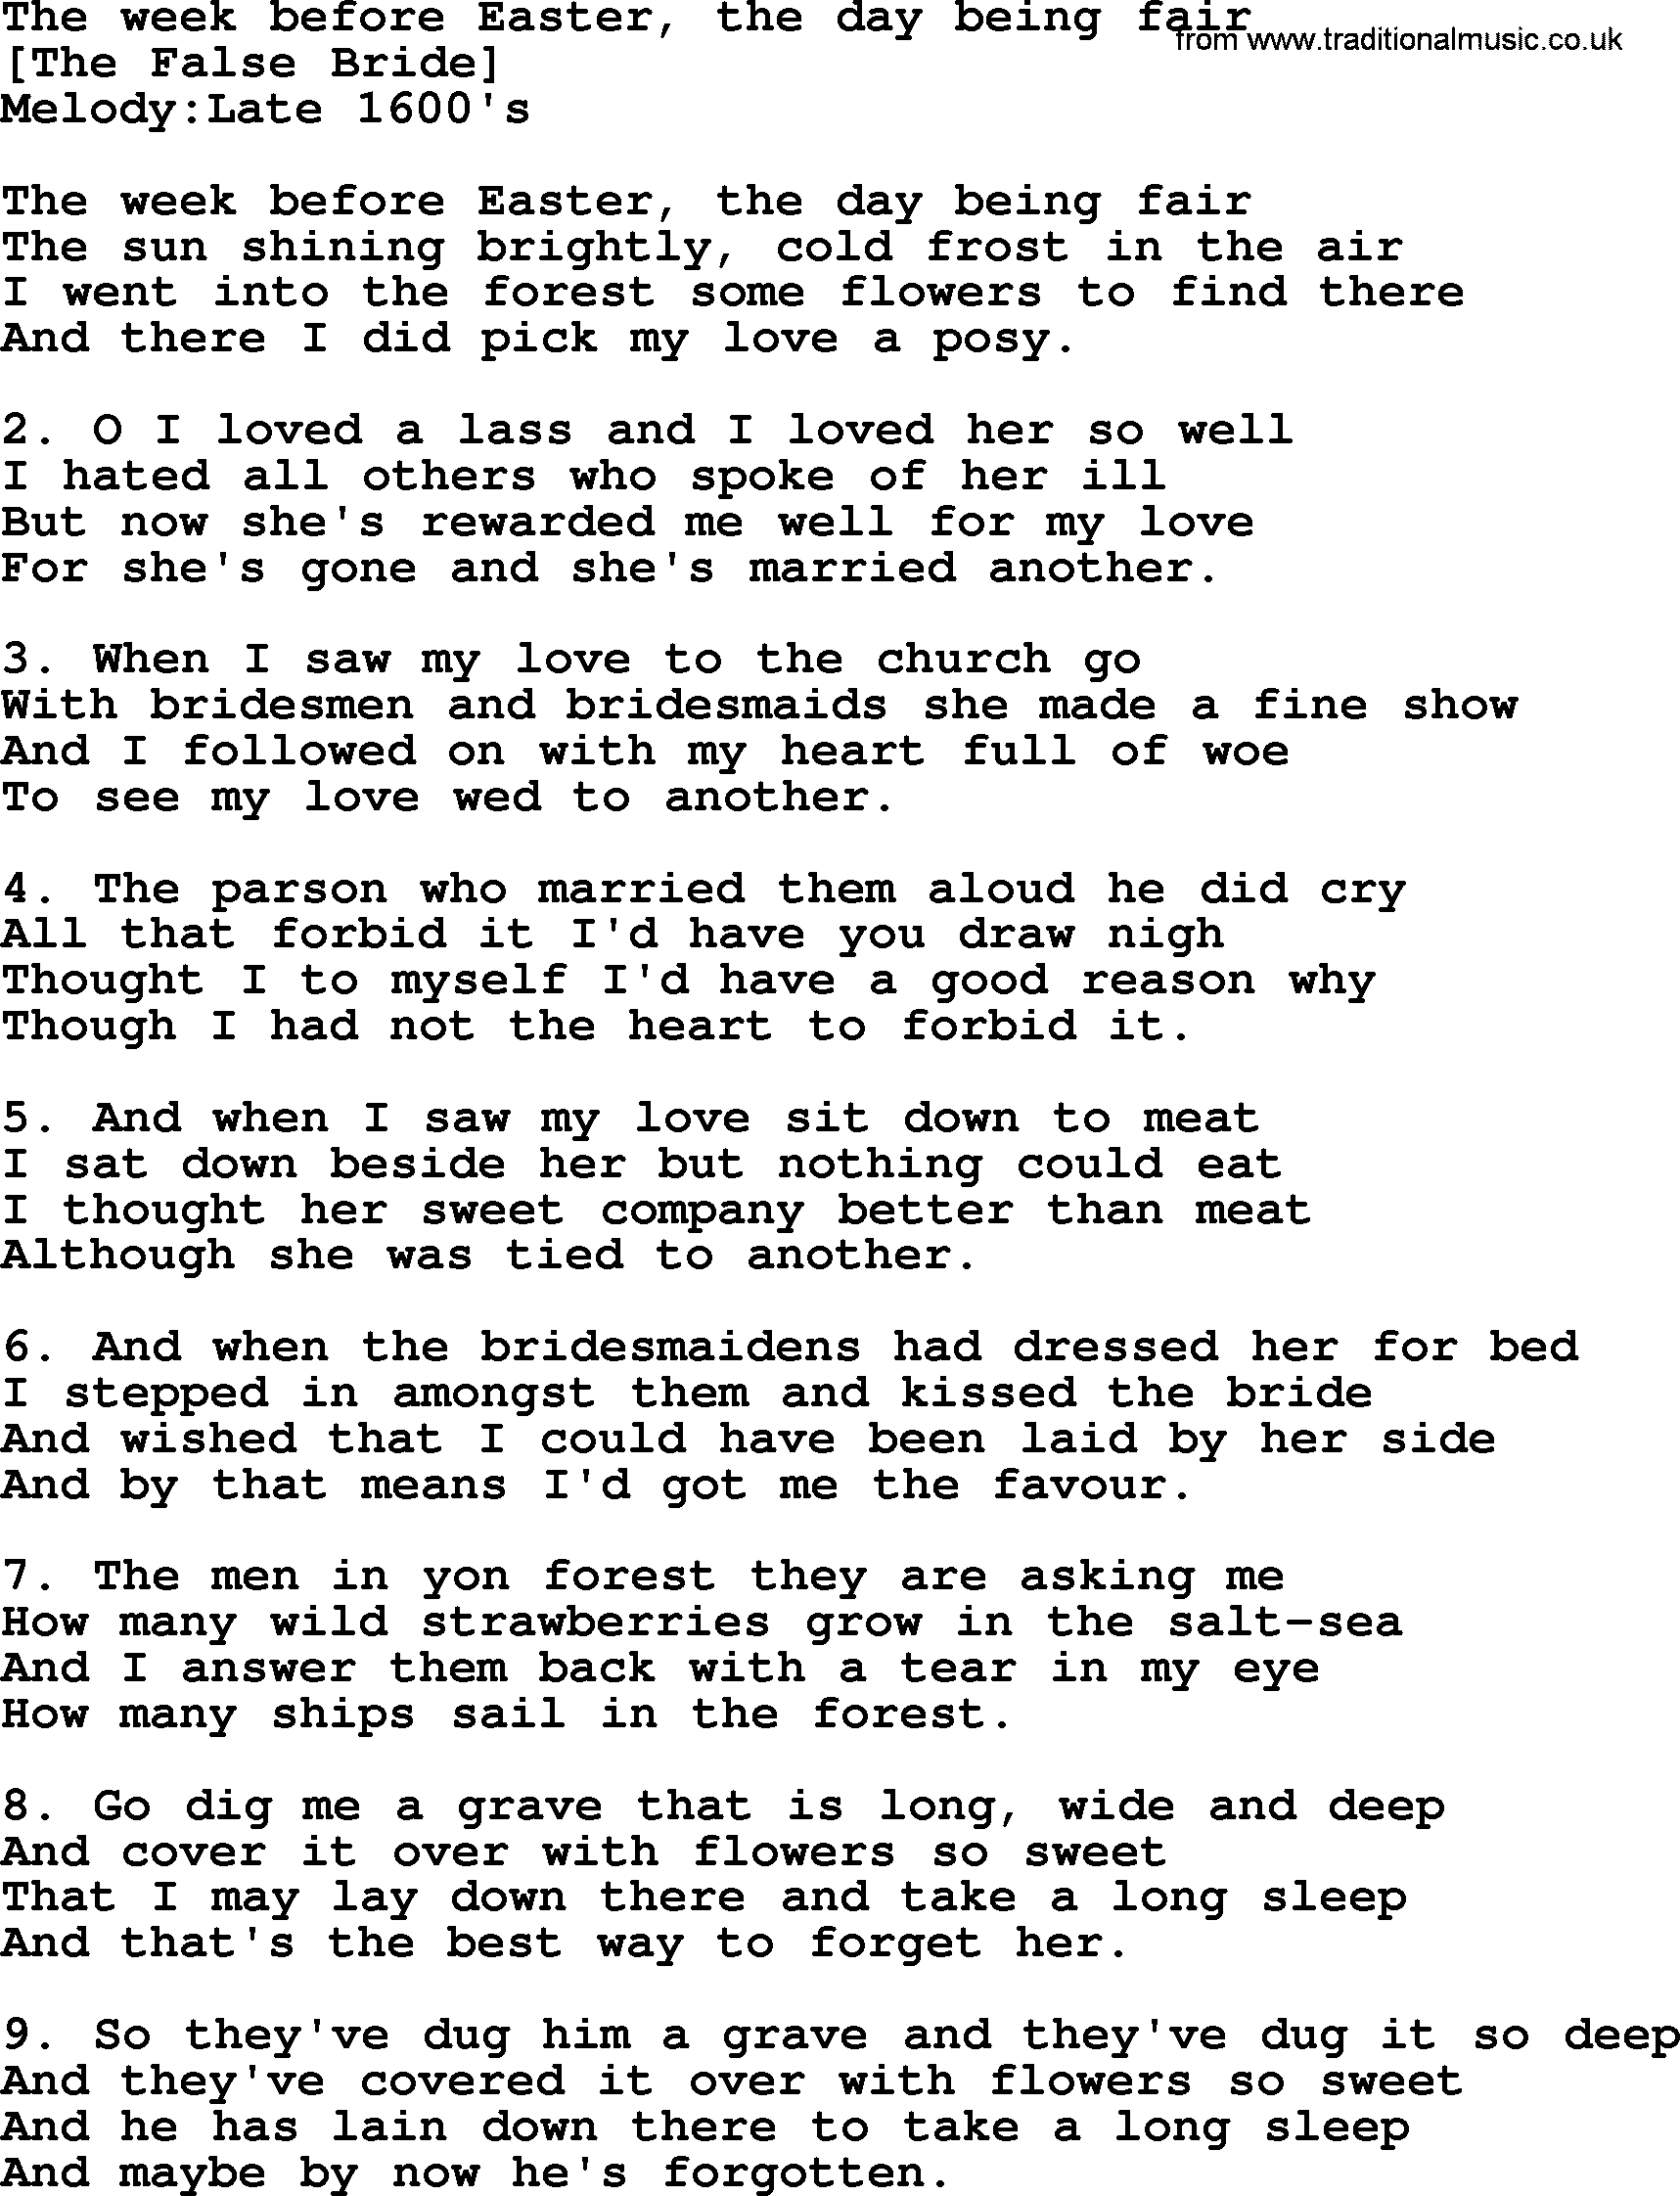 Old English Song: The Week Before Easter, The Day Being Fair lyrics